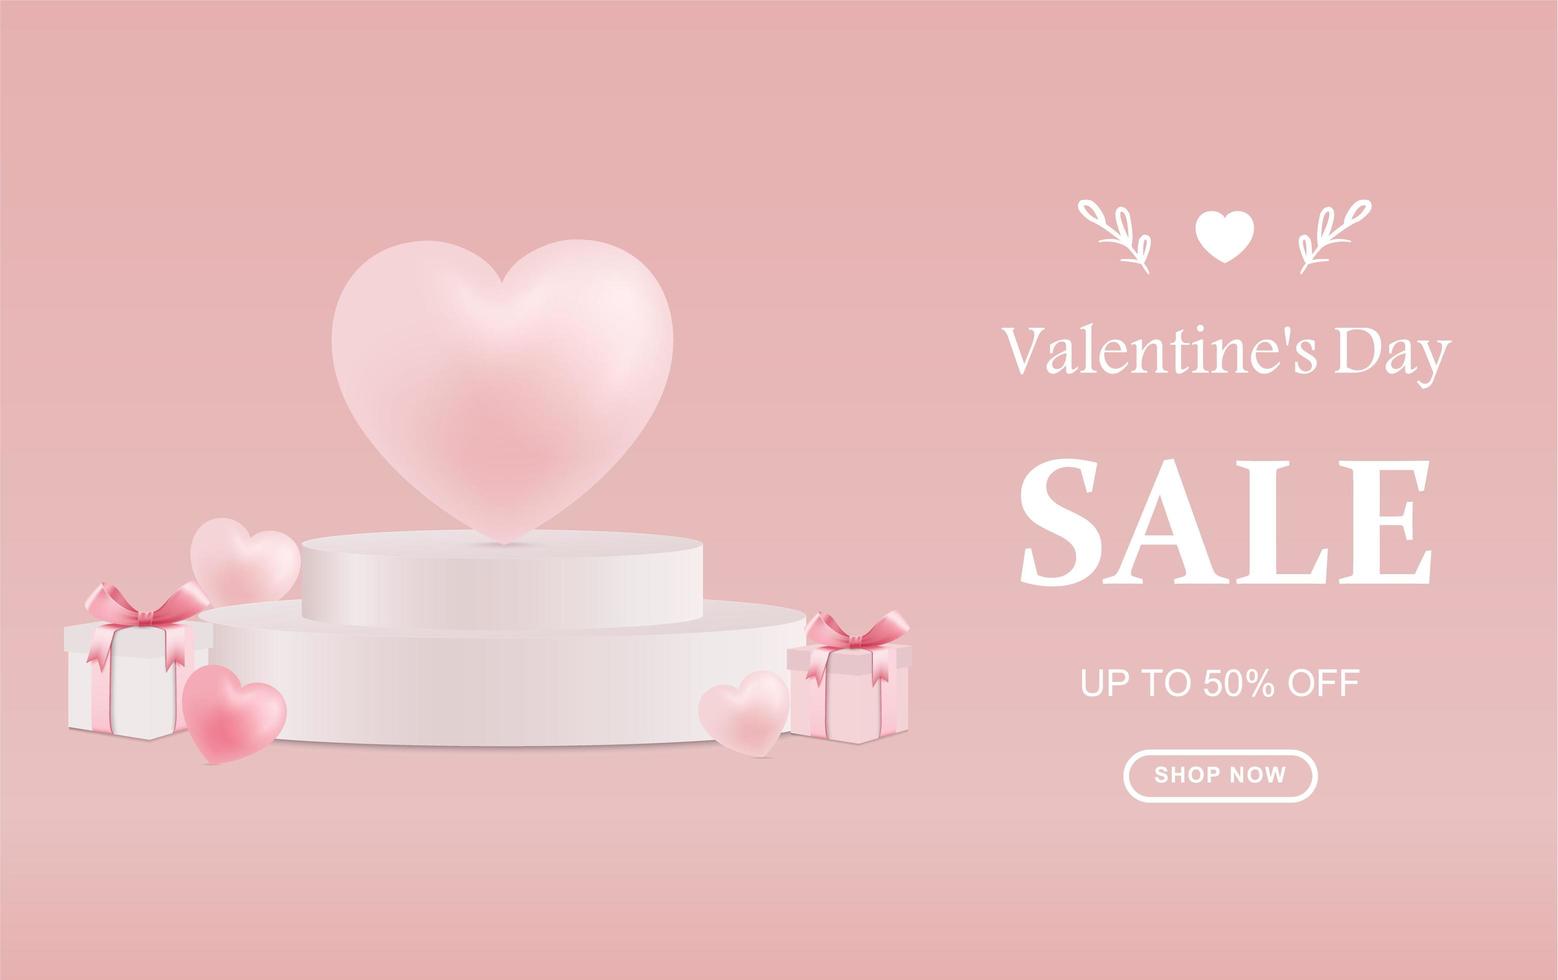 Valentines Day Sale Template, Happy Valentines day product stand vector